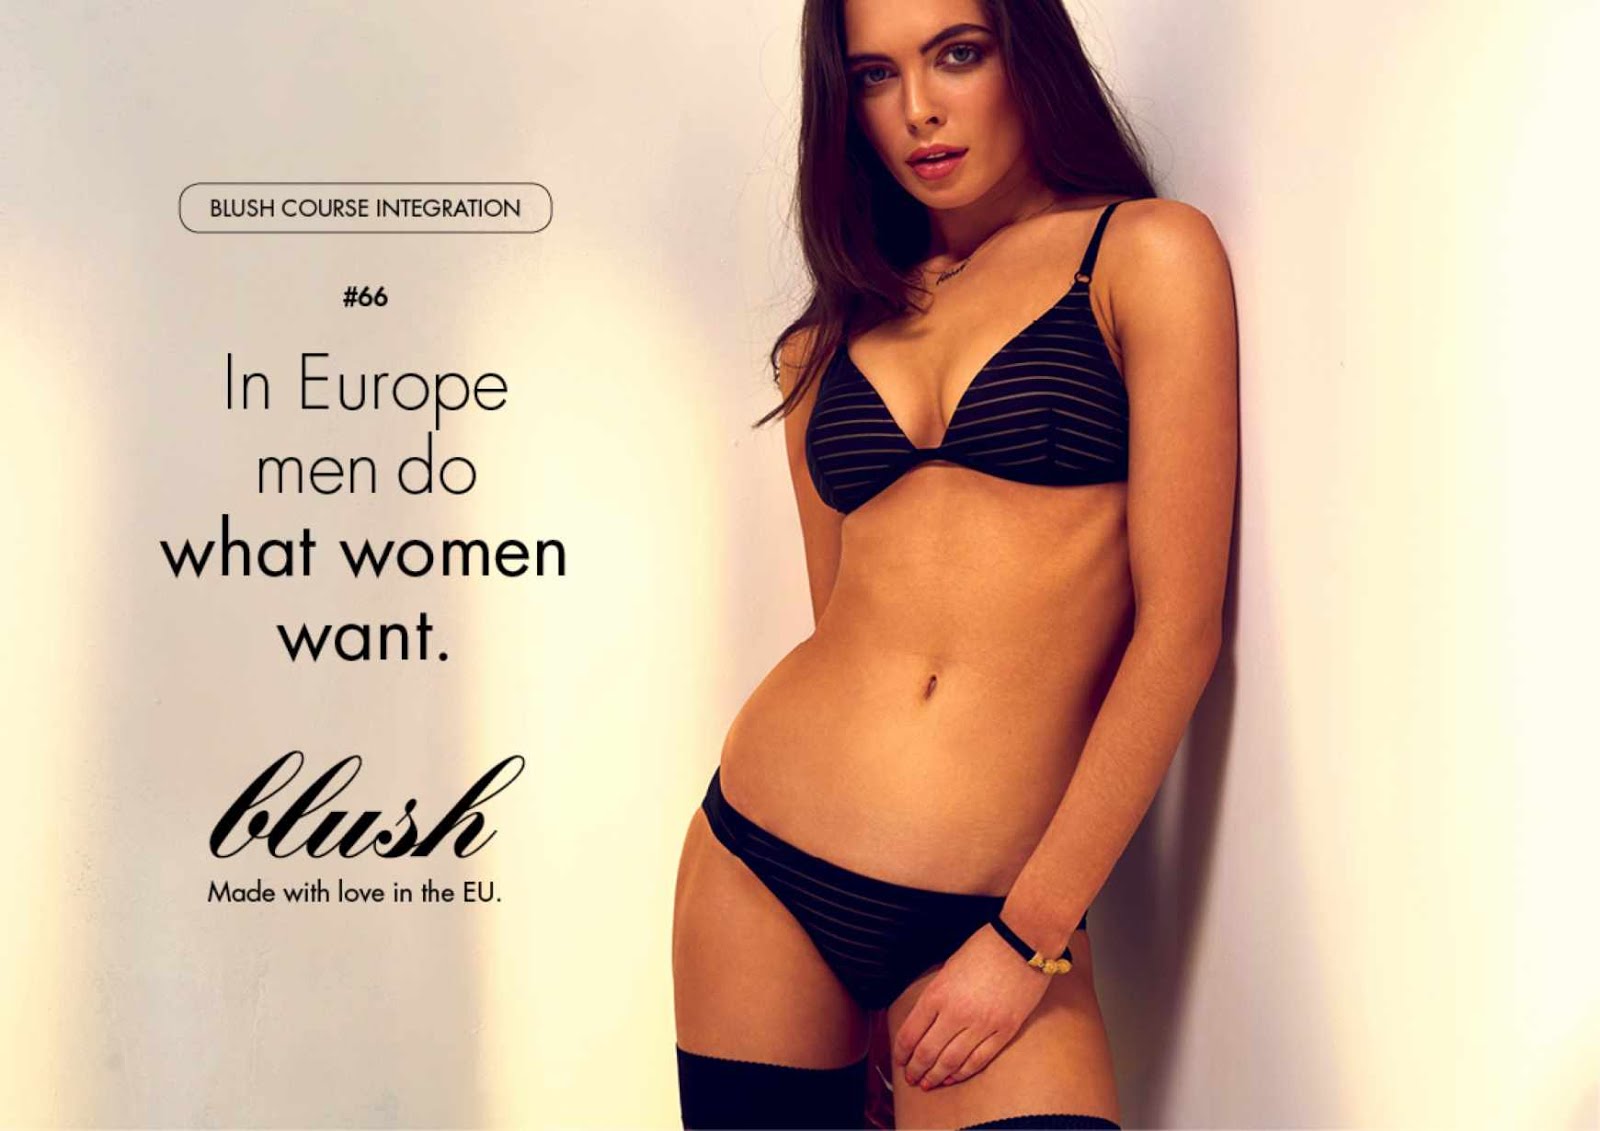 Blush Lingerie Offers Up A Crash Course On Being A Woman In Europe picture pic image